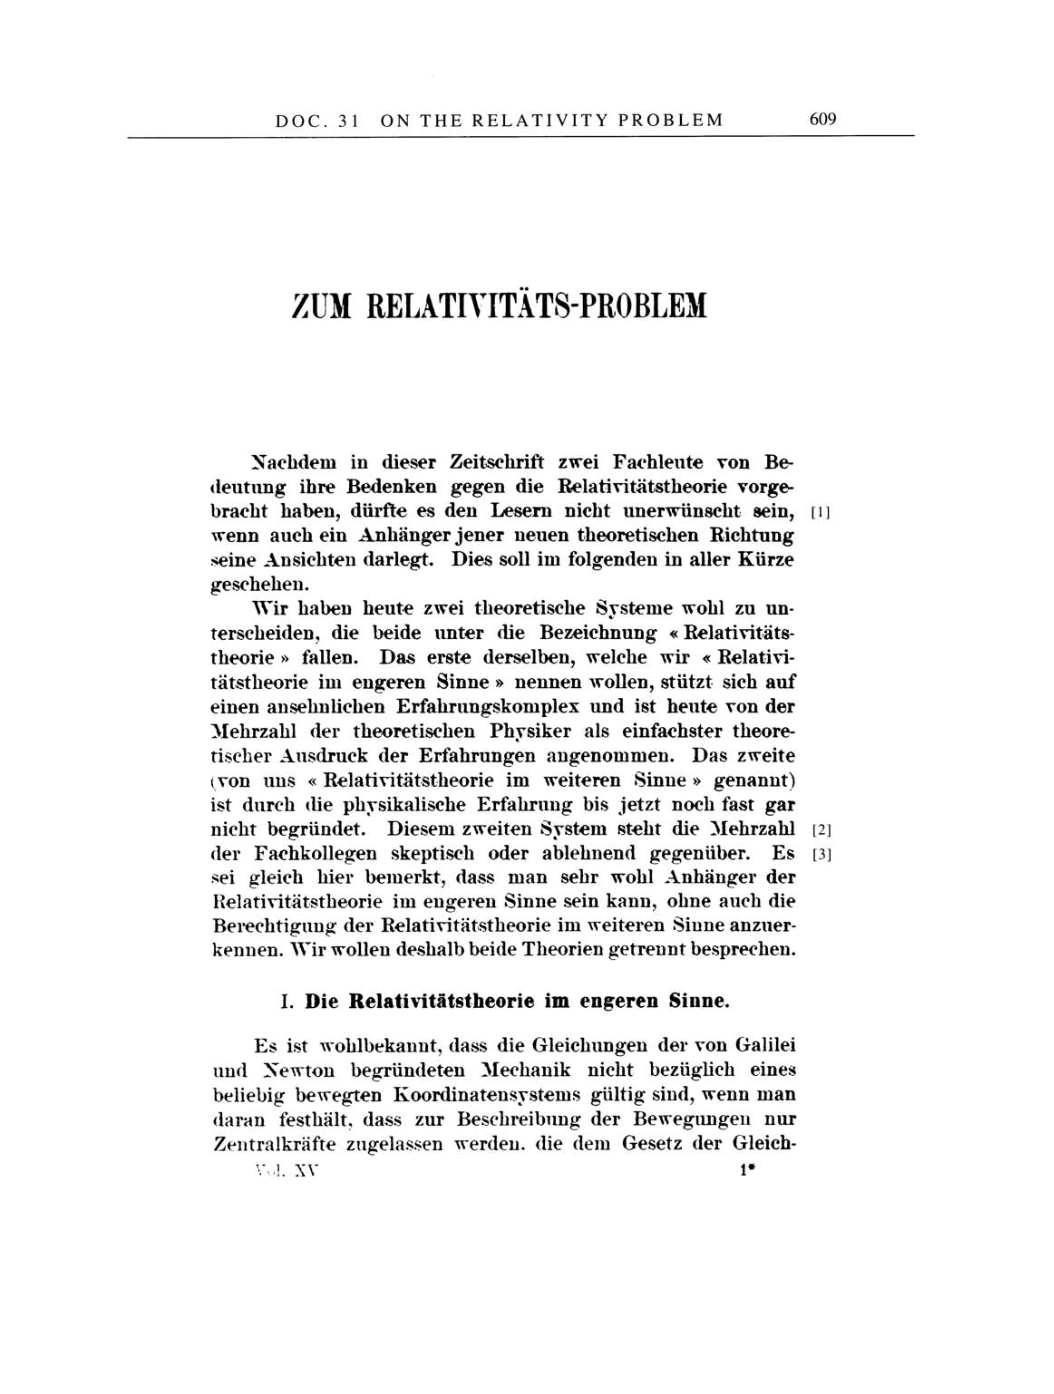 Volume 4: The Swiss Years: Writings 1912-1914 page 609